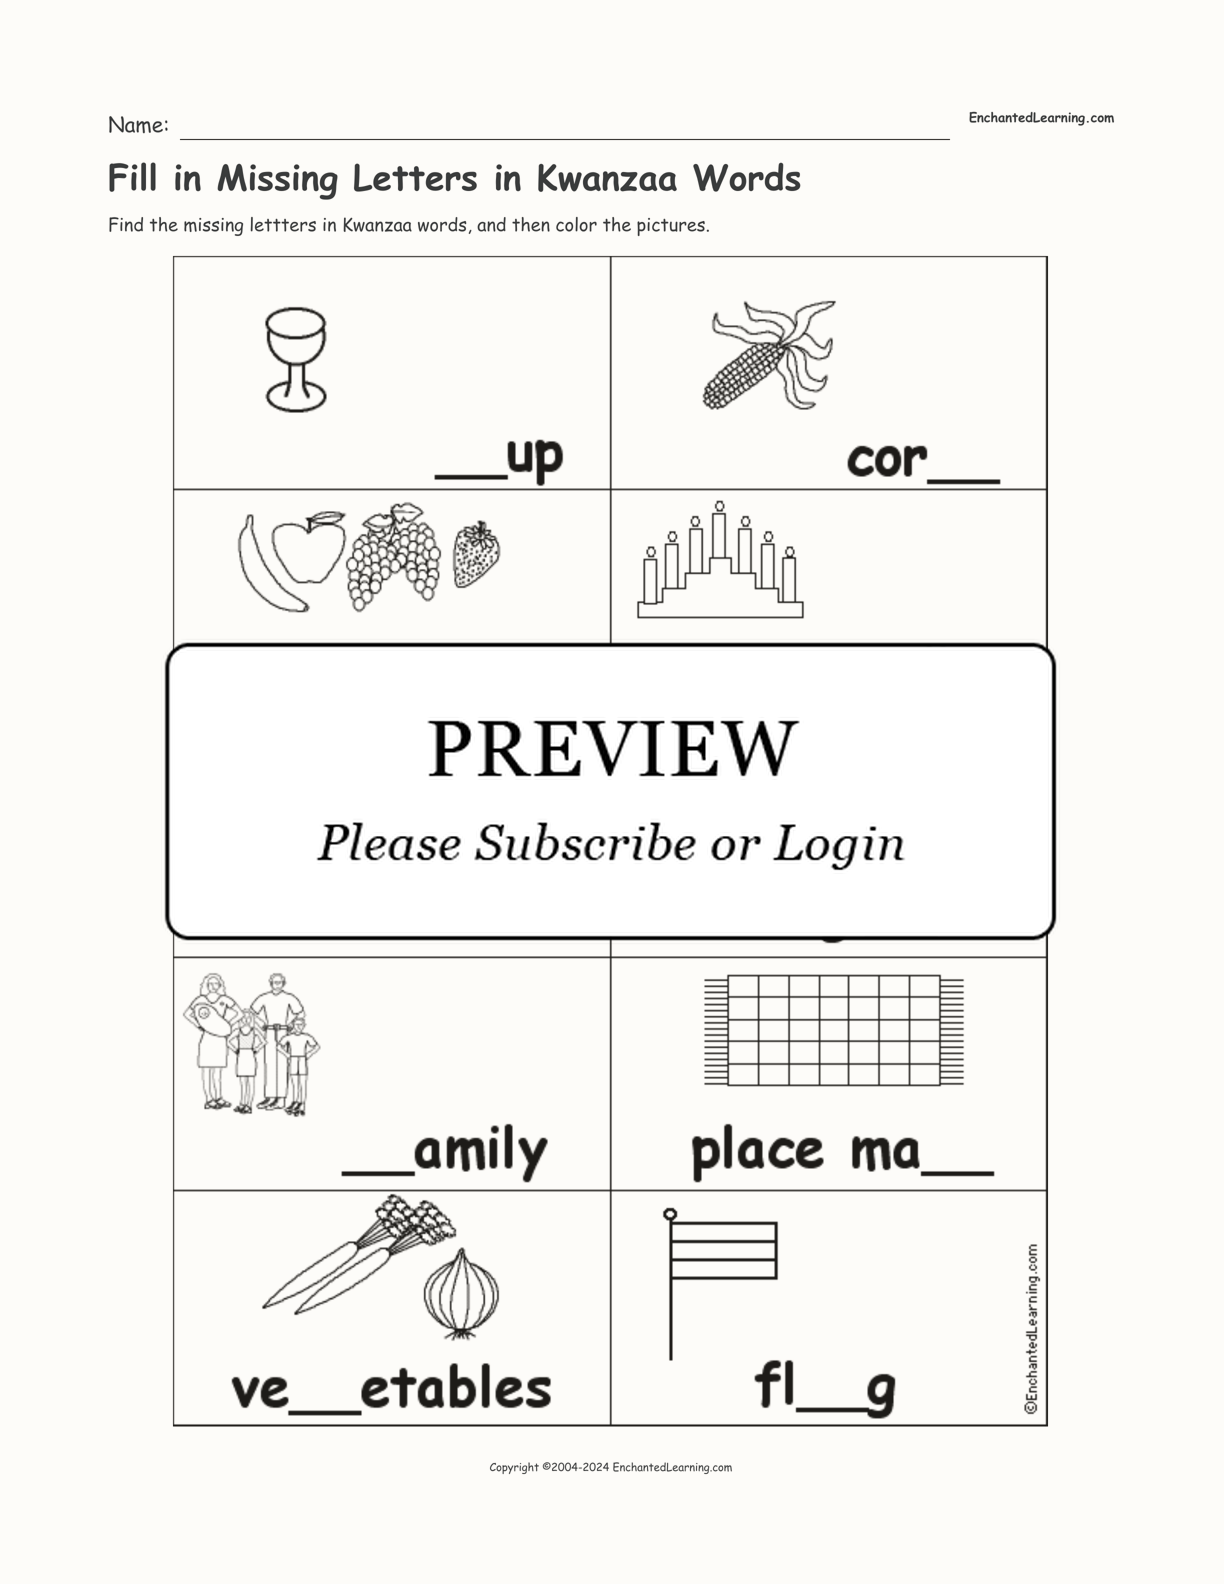 Fill in Missing Letters in Kwanzaa Words interactive worksheet page 1